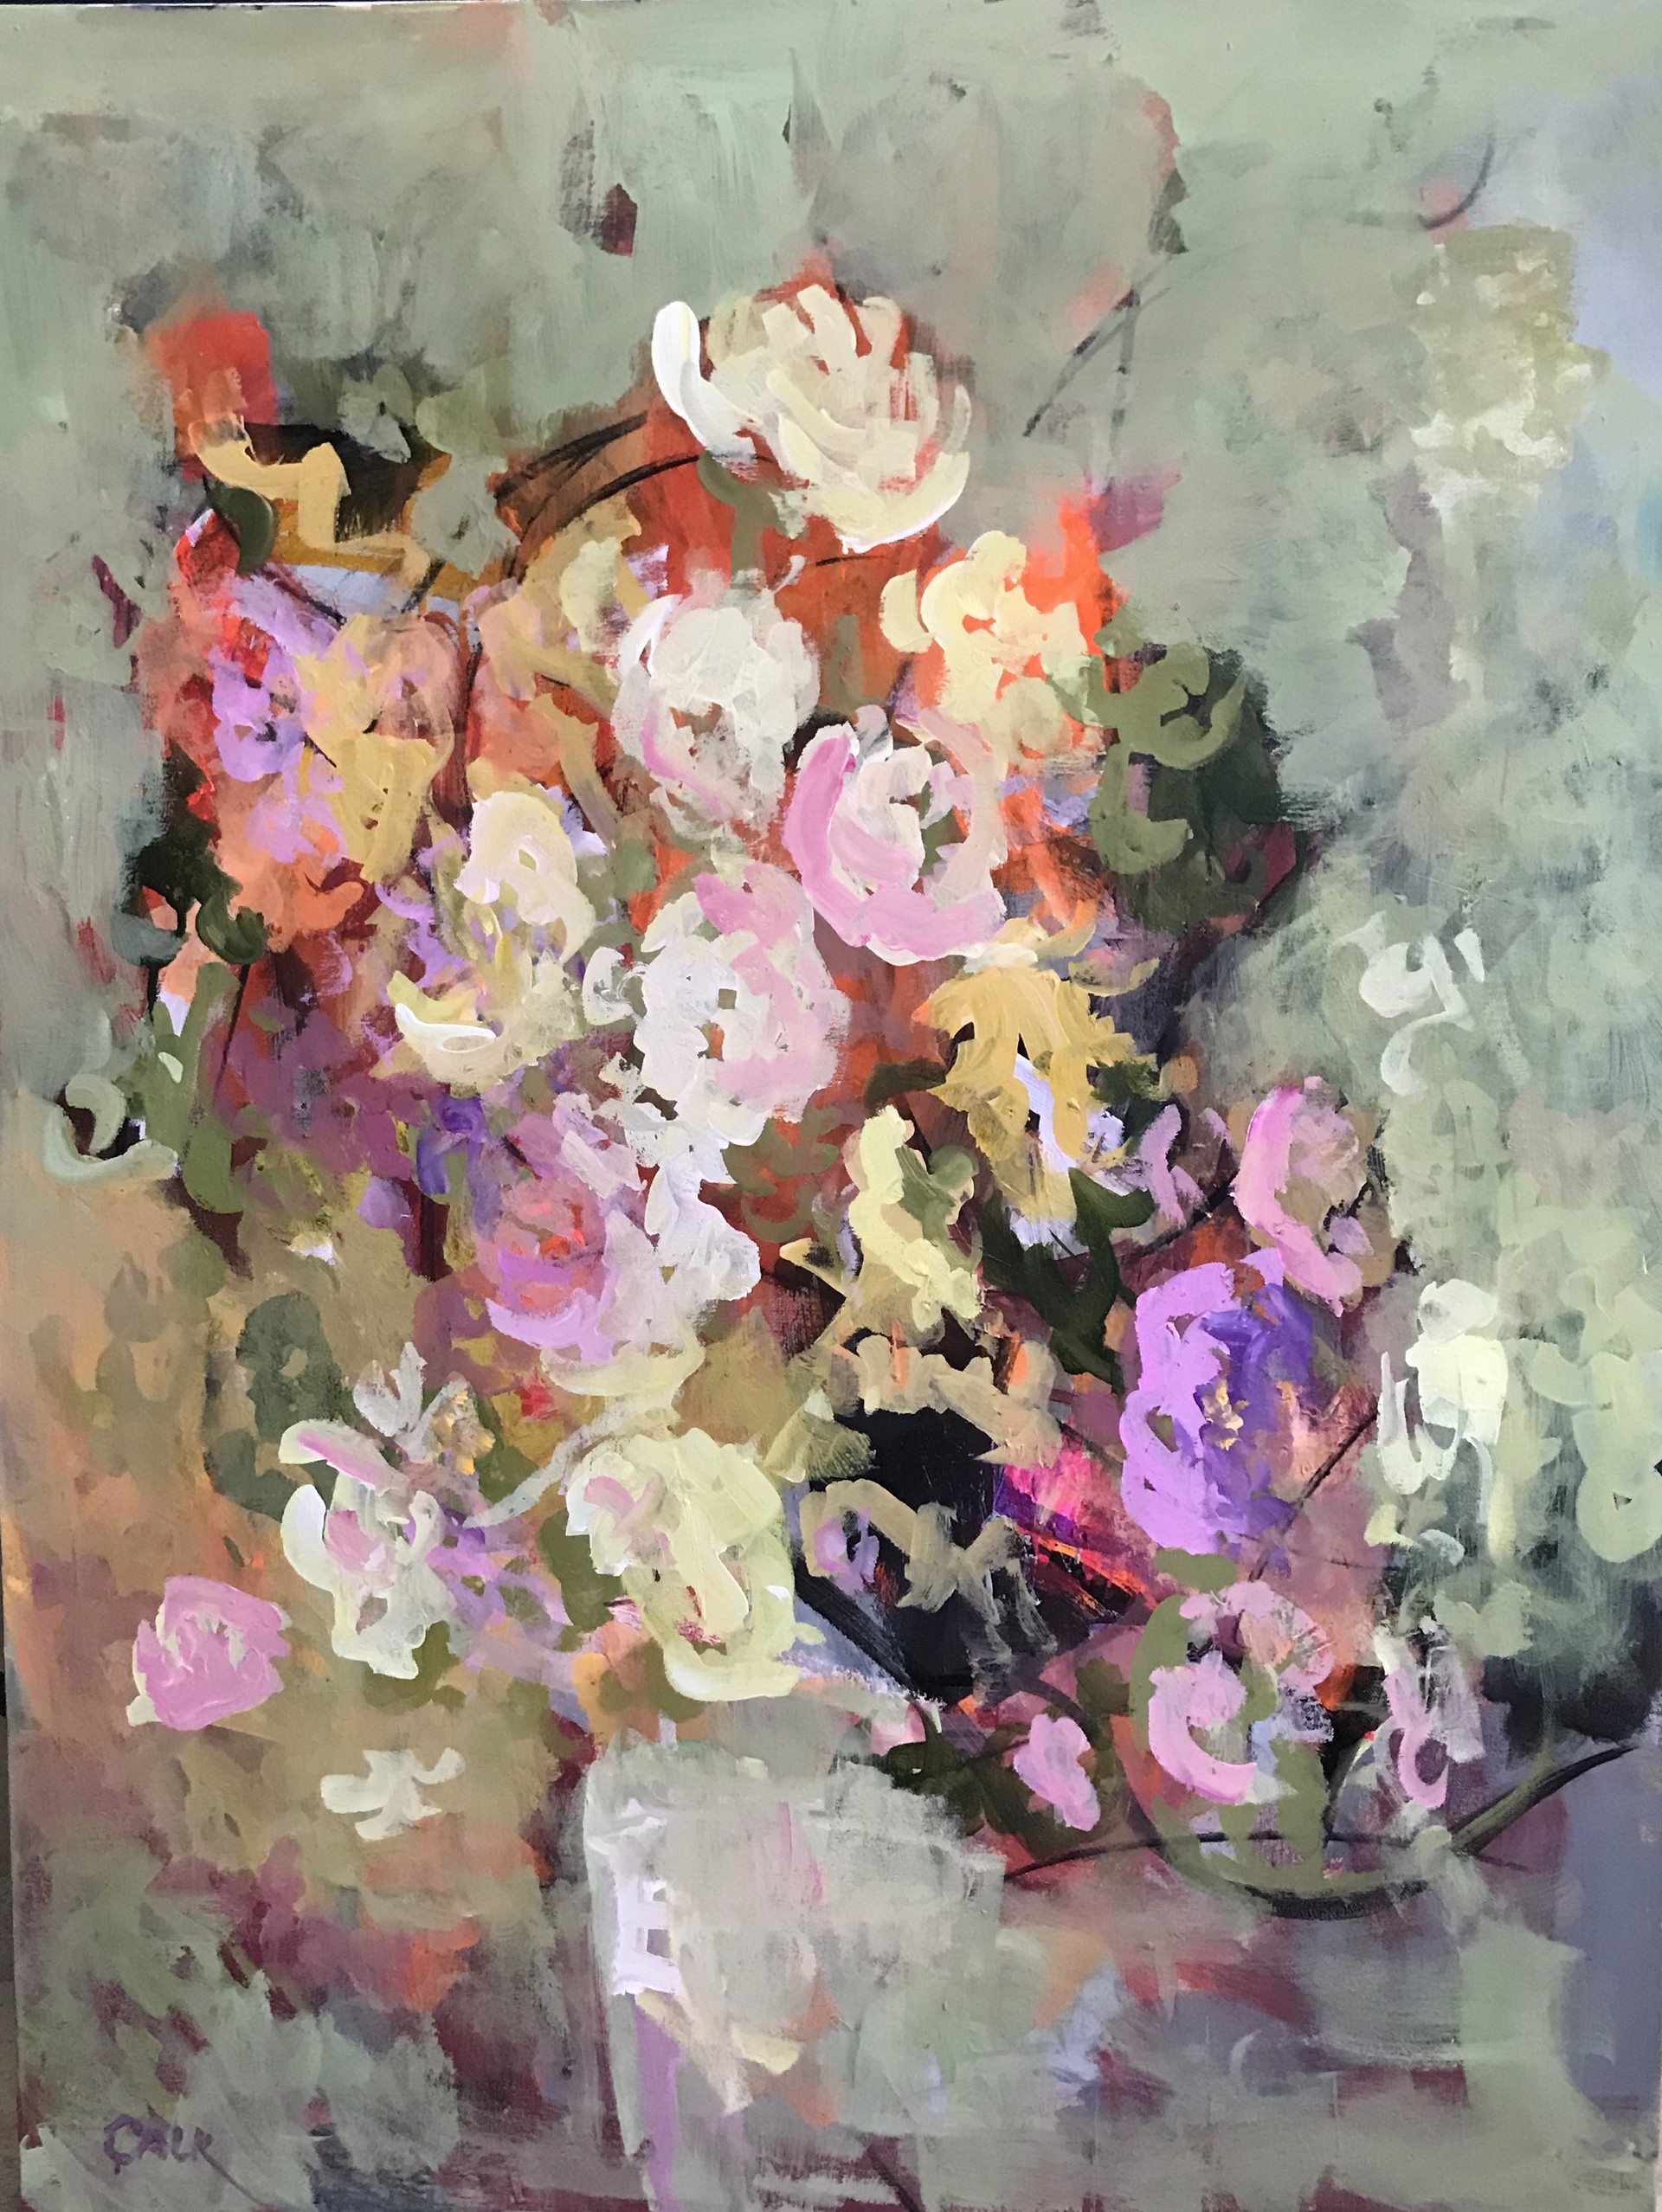 Collection from the Garden by James Calk